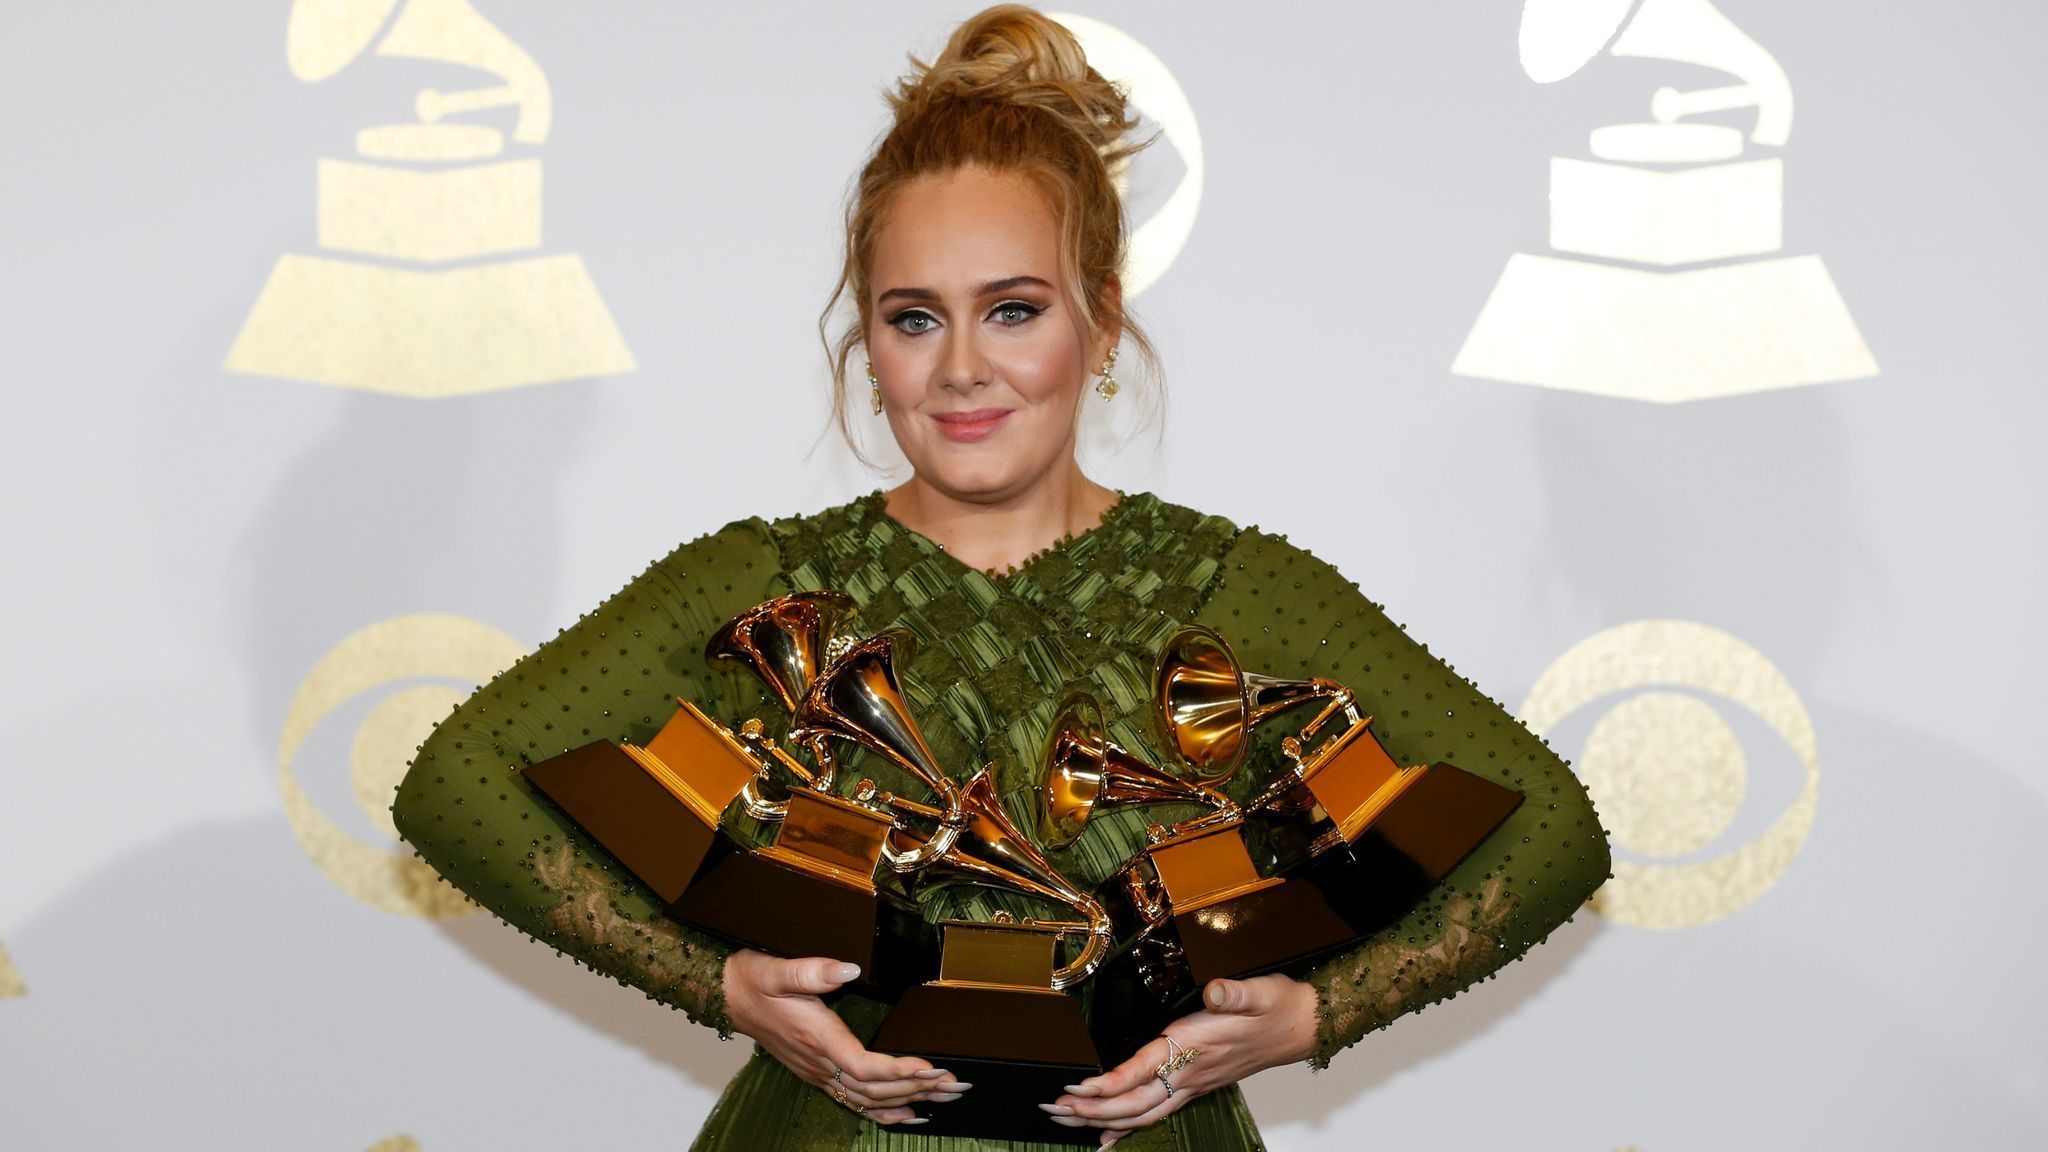 The Grammy Awards return to Los Angeles in 2019 - Hartford Courant2048 x 1152